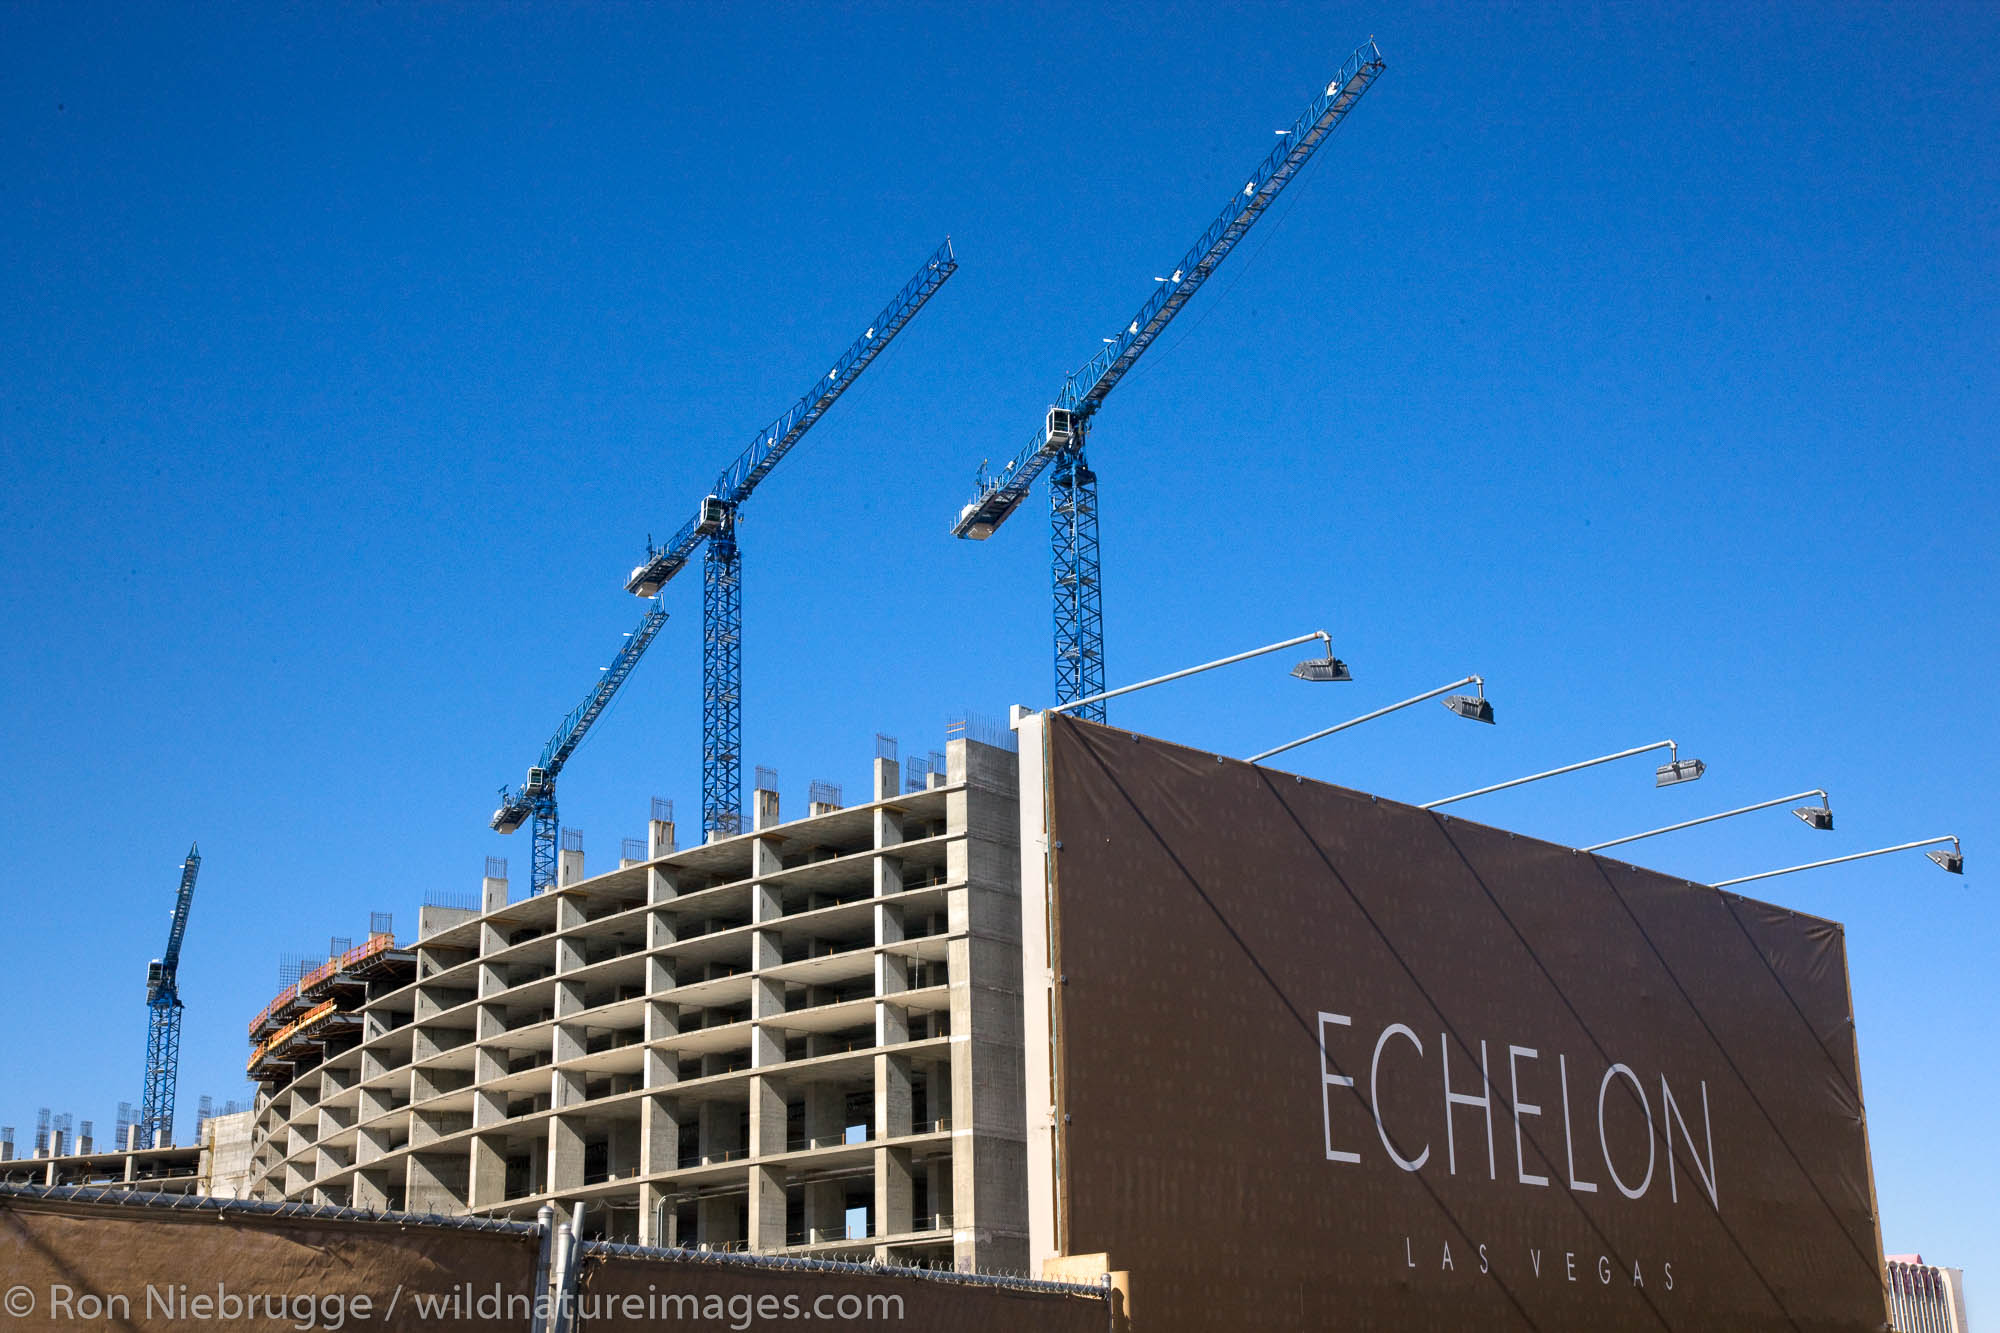 Construction has stopped on the huge Echelon Hotel and Casino because of the economy, Las Vegas, Nevada.